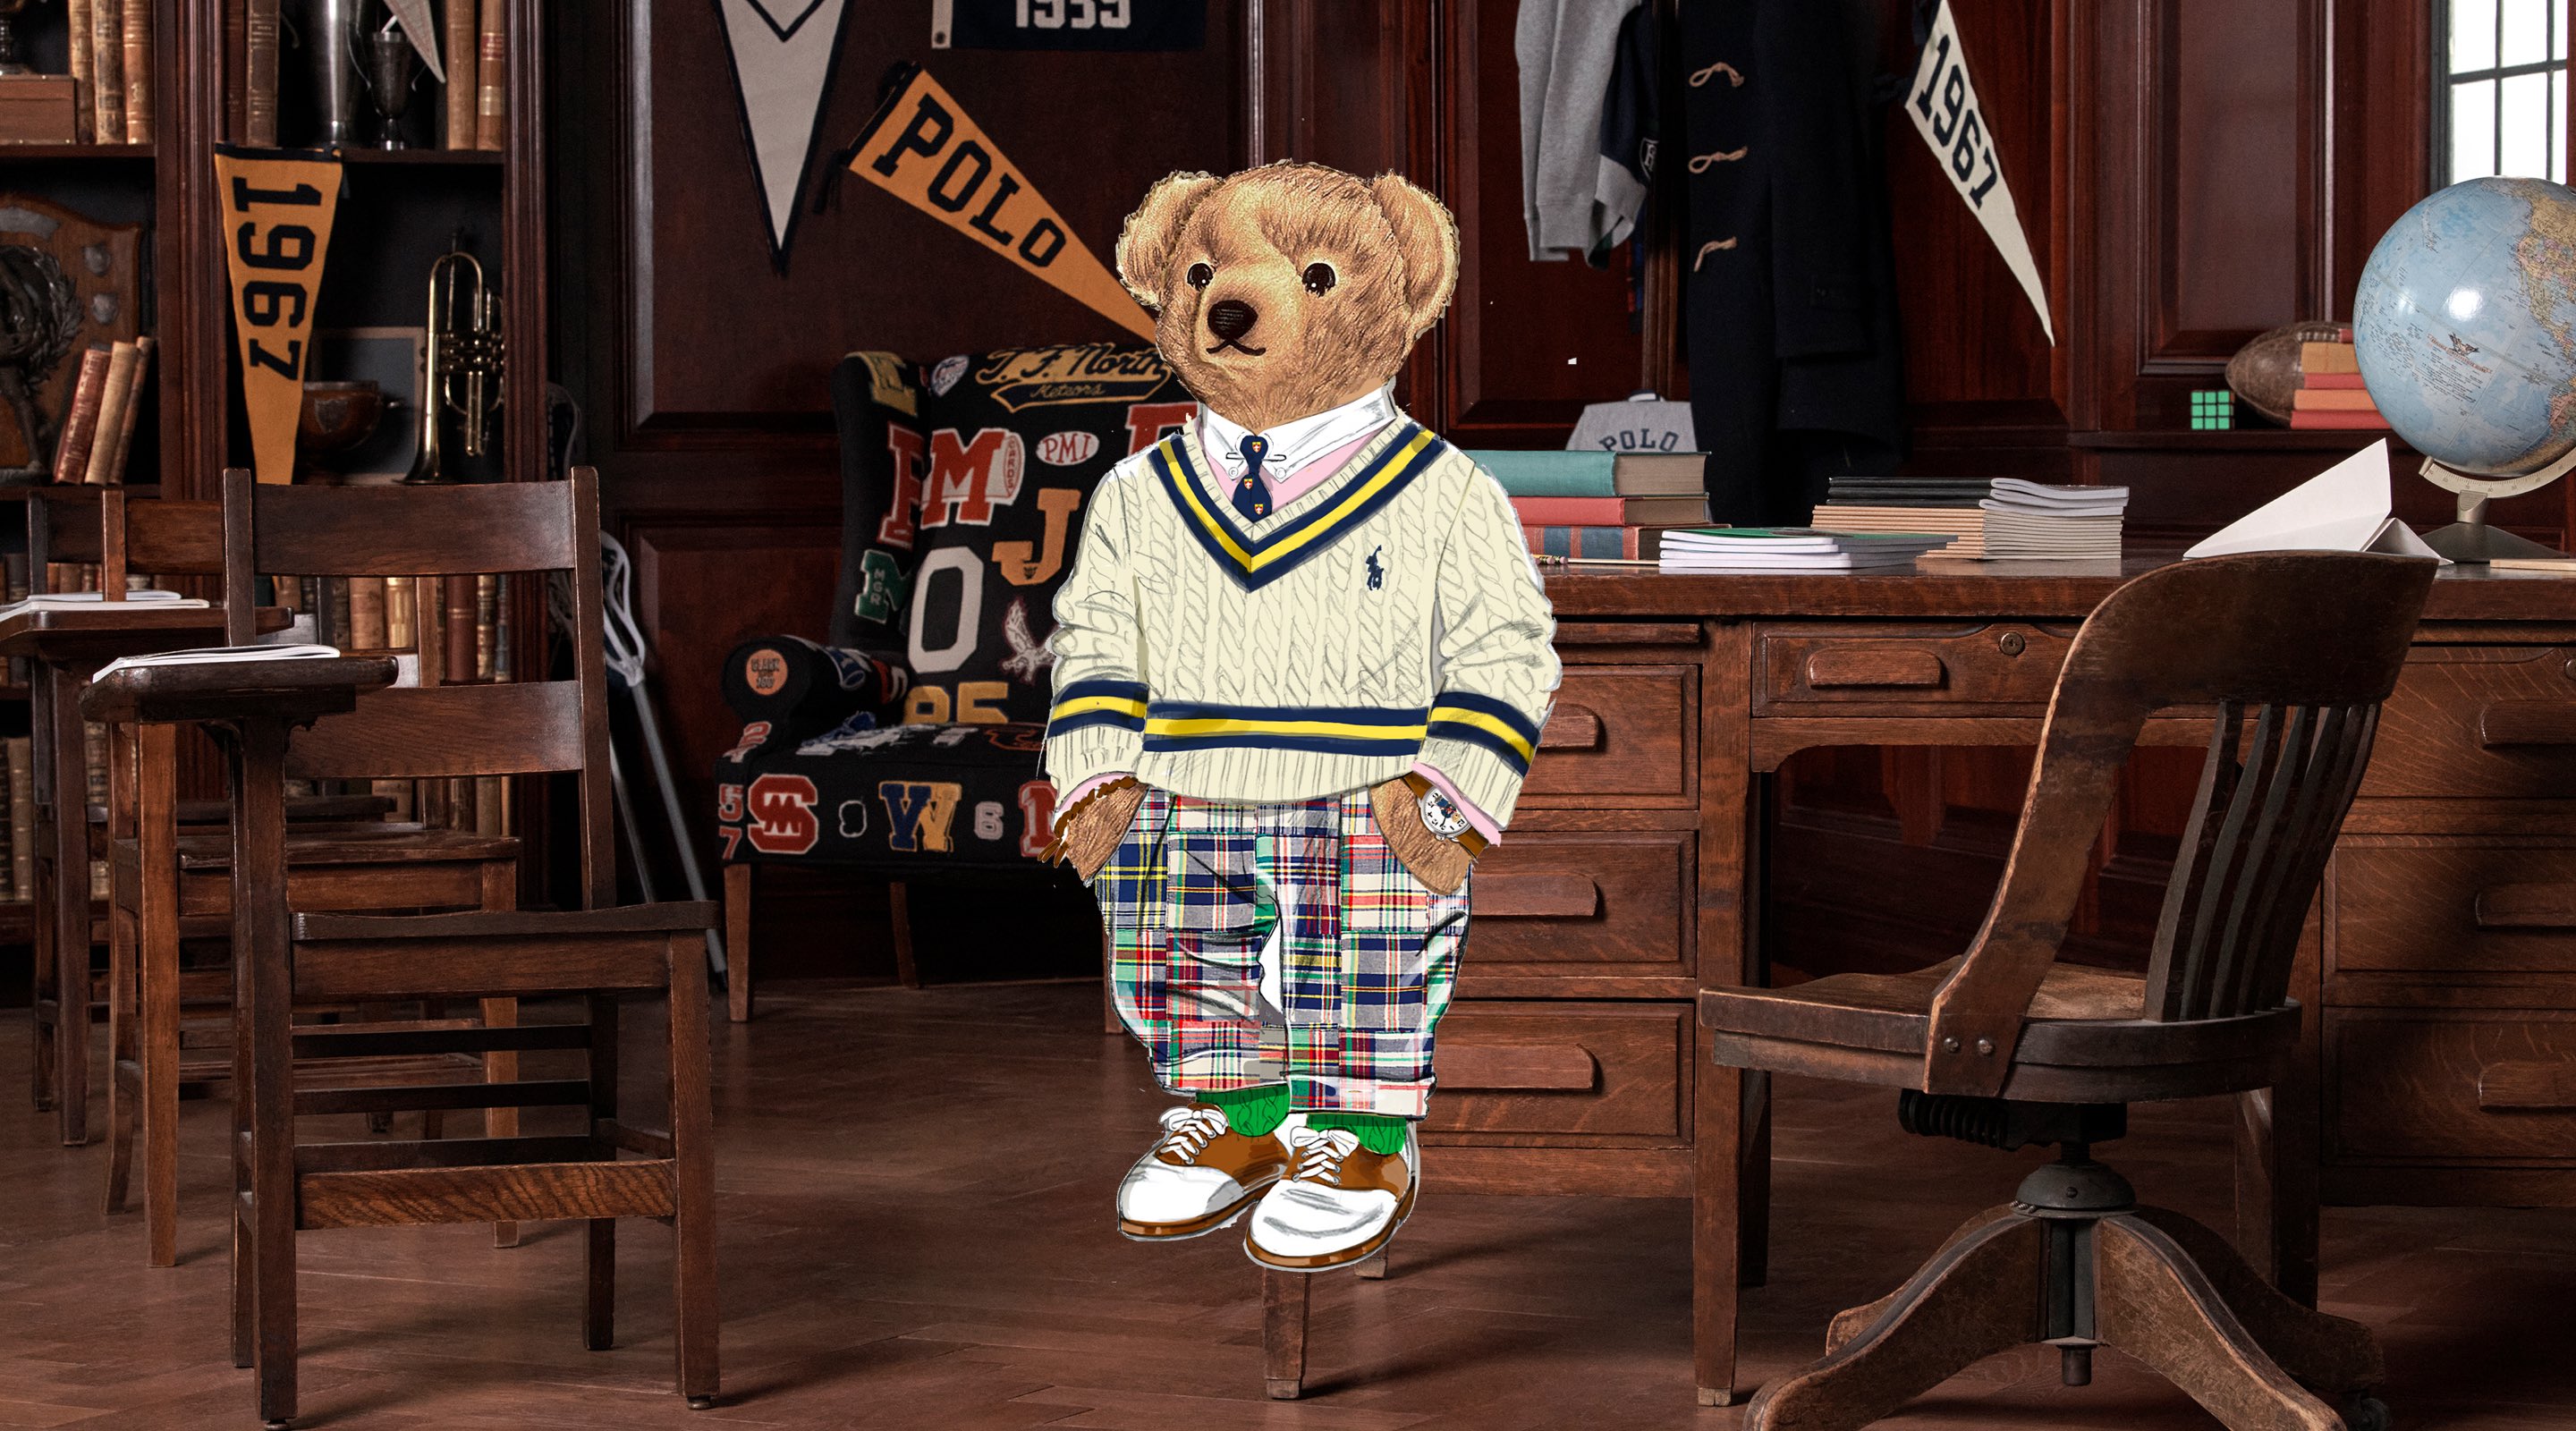 Video animation of the Polo Bear.